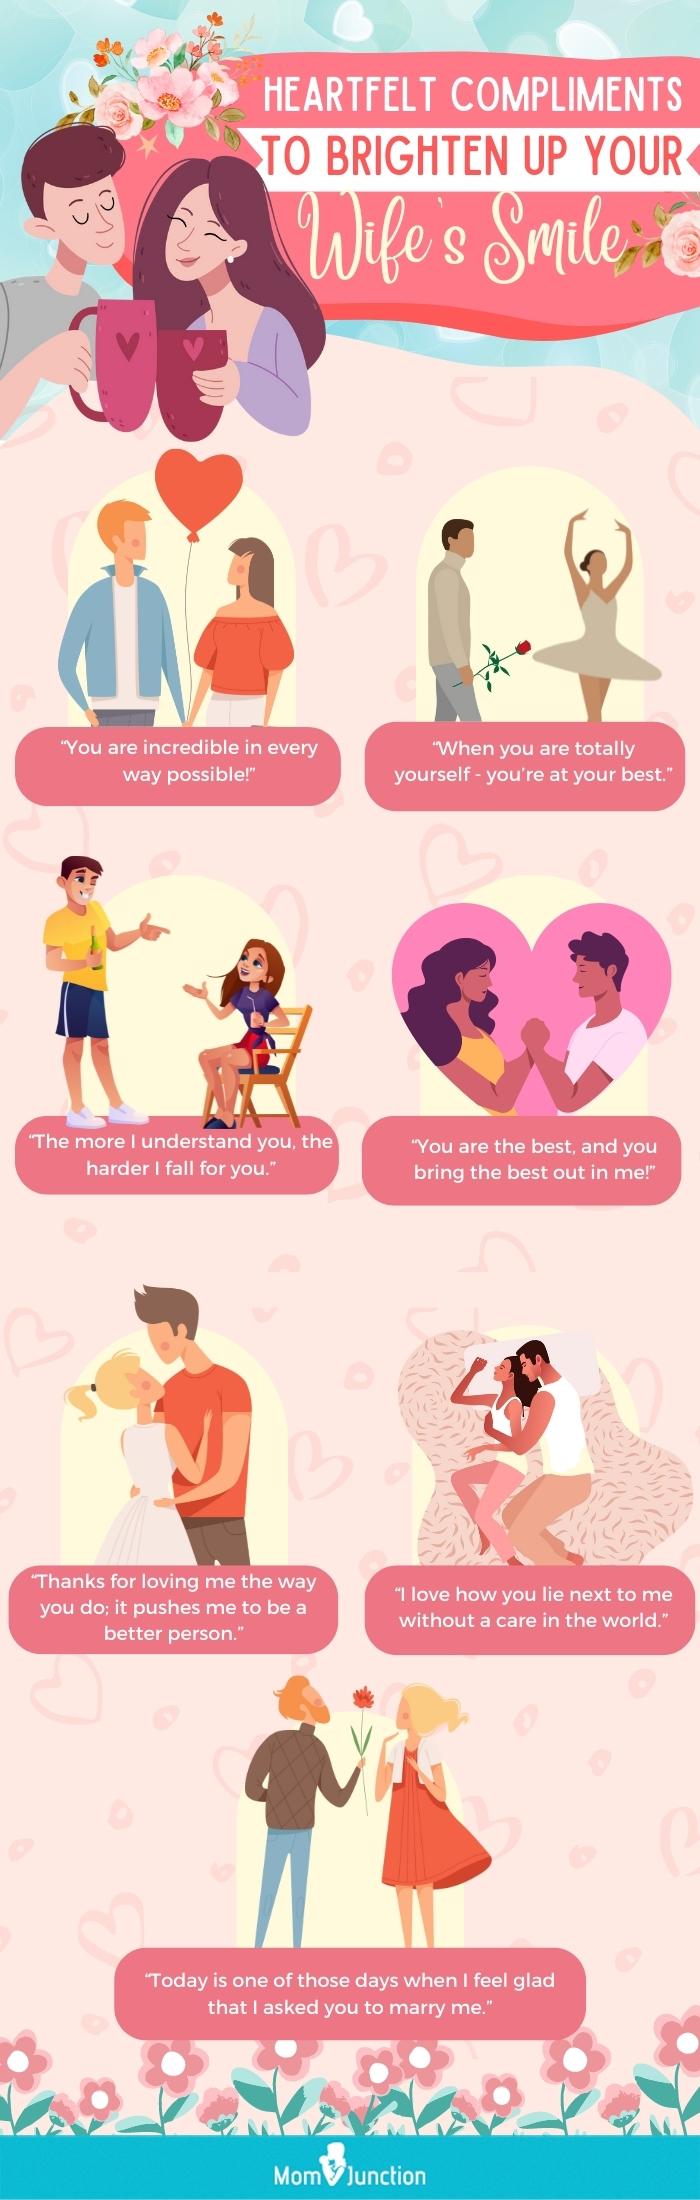 heartfelt compliments to brighten up your wife’s smile (infographic)